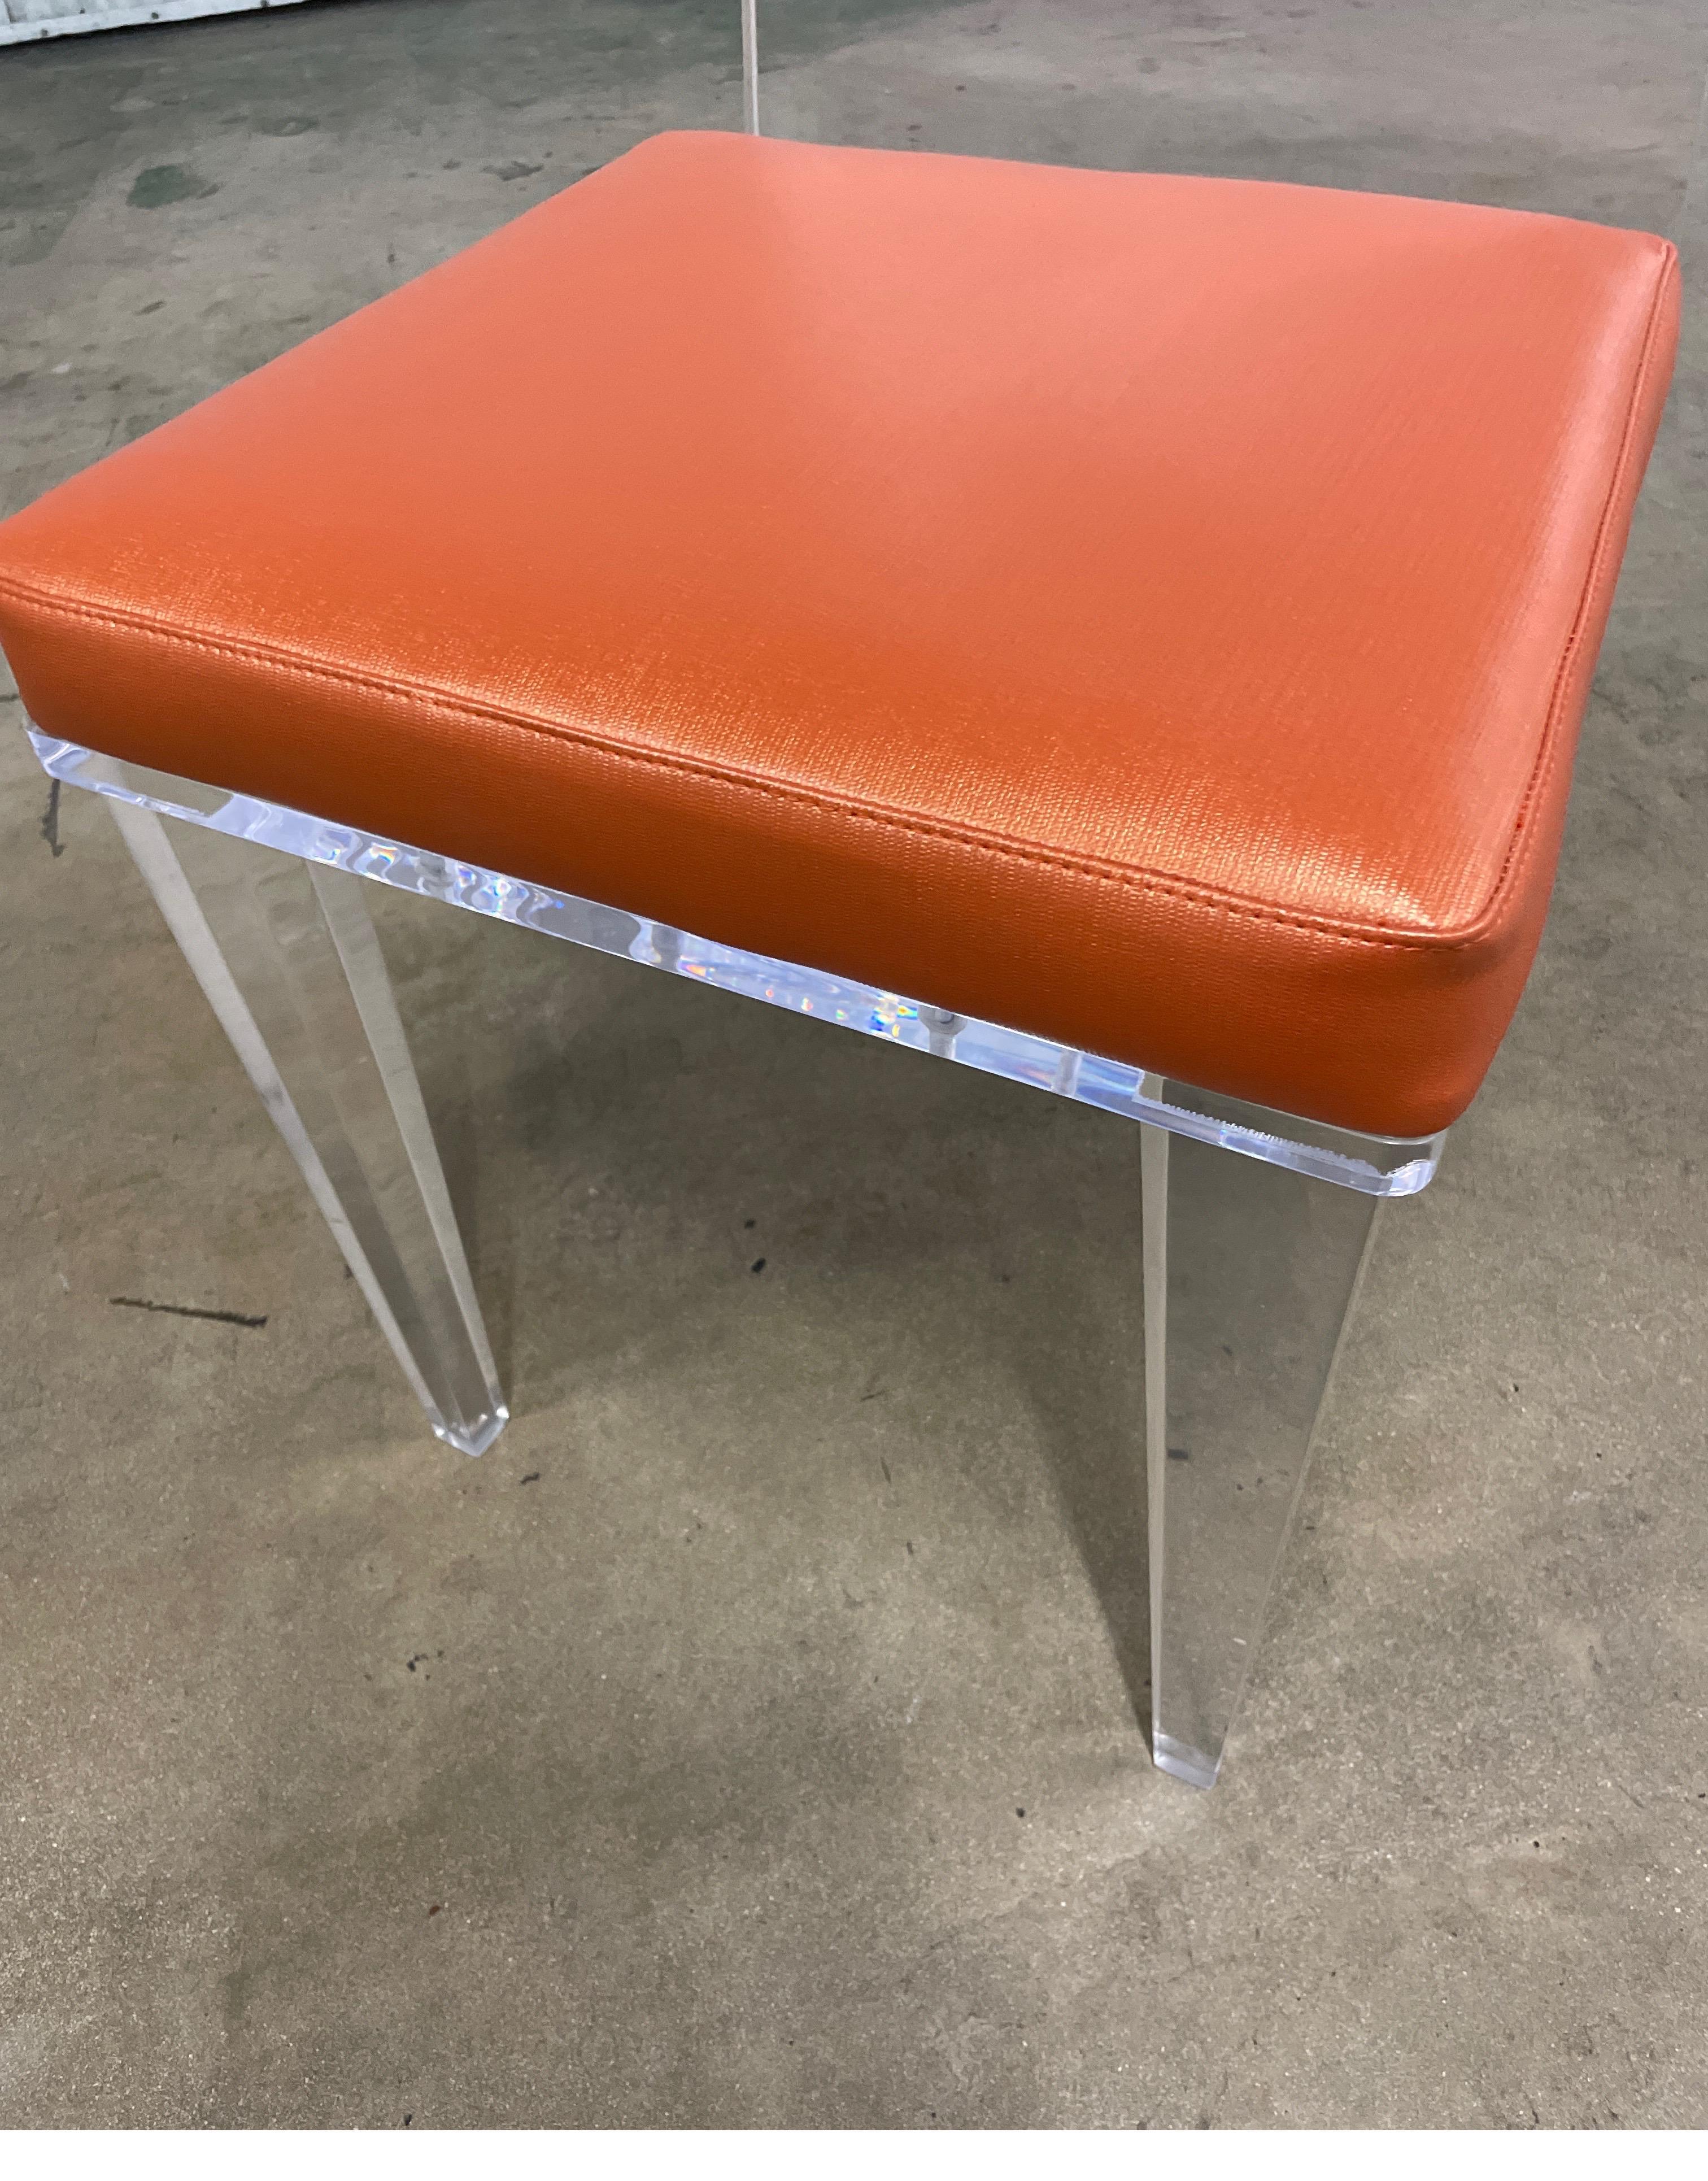 Heavy Lucite side chair with neoclassical legs and cut out back. Seat is upholstered in an Hermes orange faux leather.